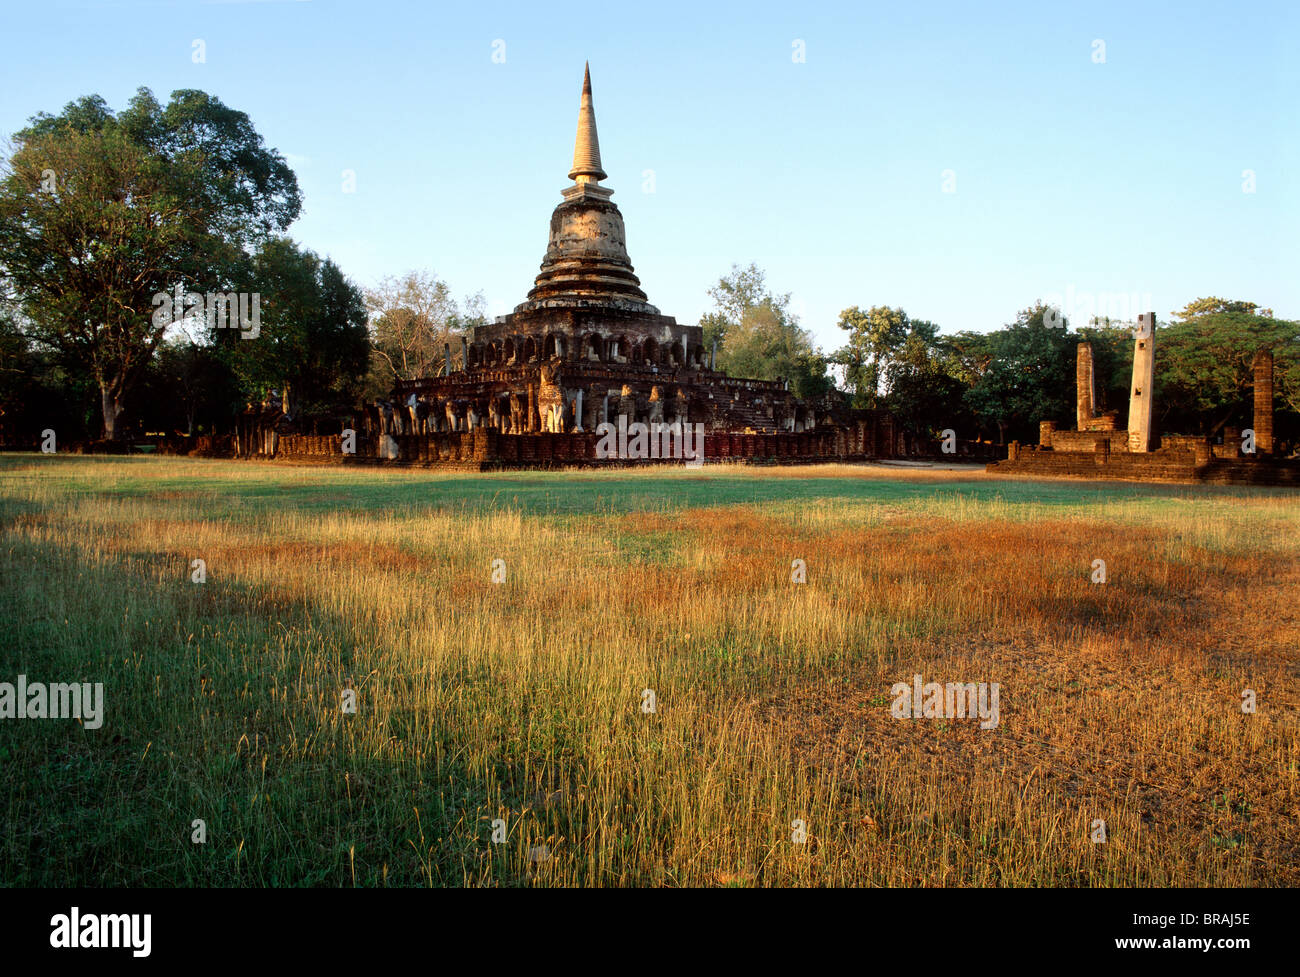 Wat Chang Lom, dating from the last 13th century, Si Satchanalai, Thailand, Southeast Asia, Asia Stock Photo